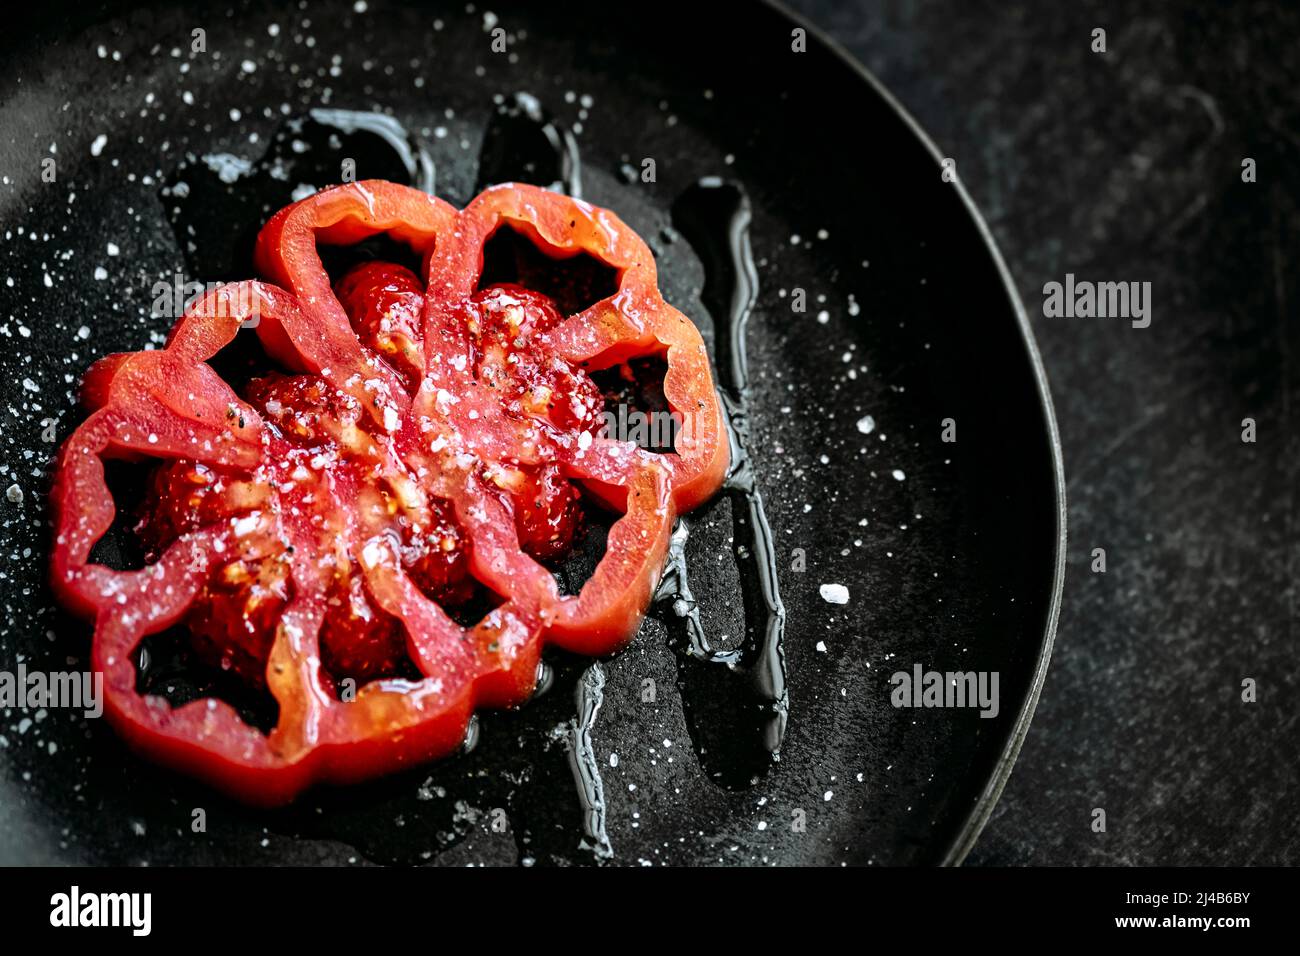 slice of beef heart tomato, placed on a black plate, salt, pepper and olive oil, on a black textured background. view from above Stock Photo